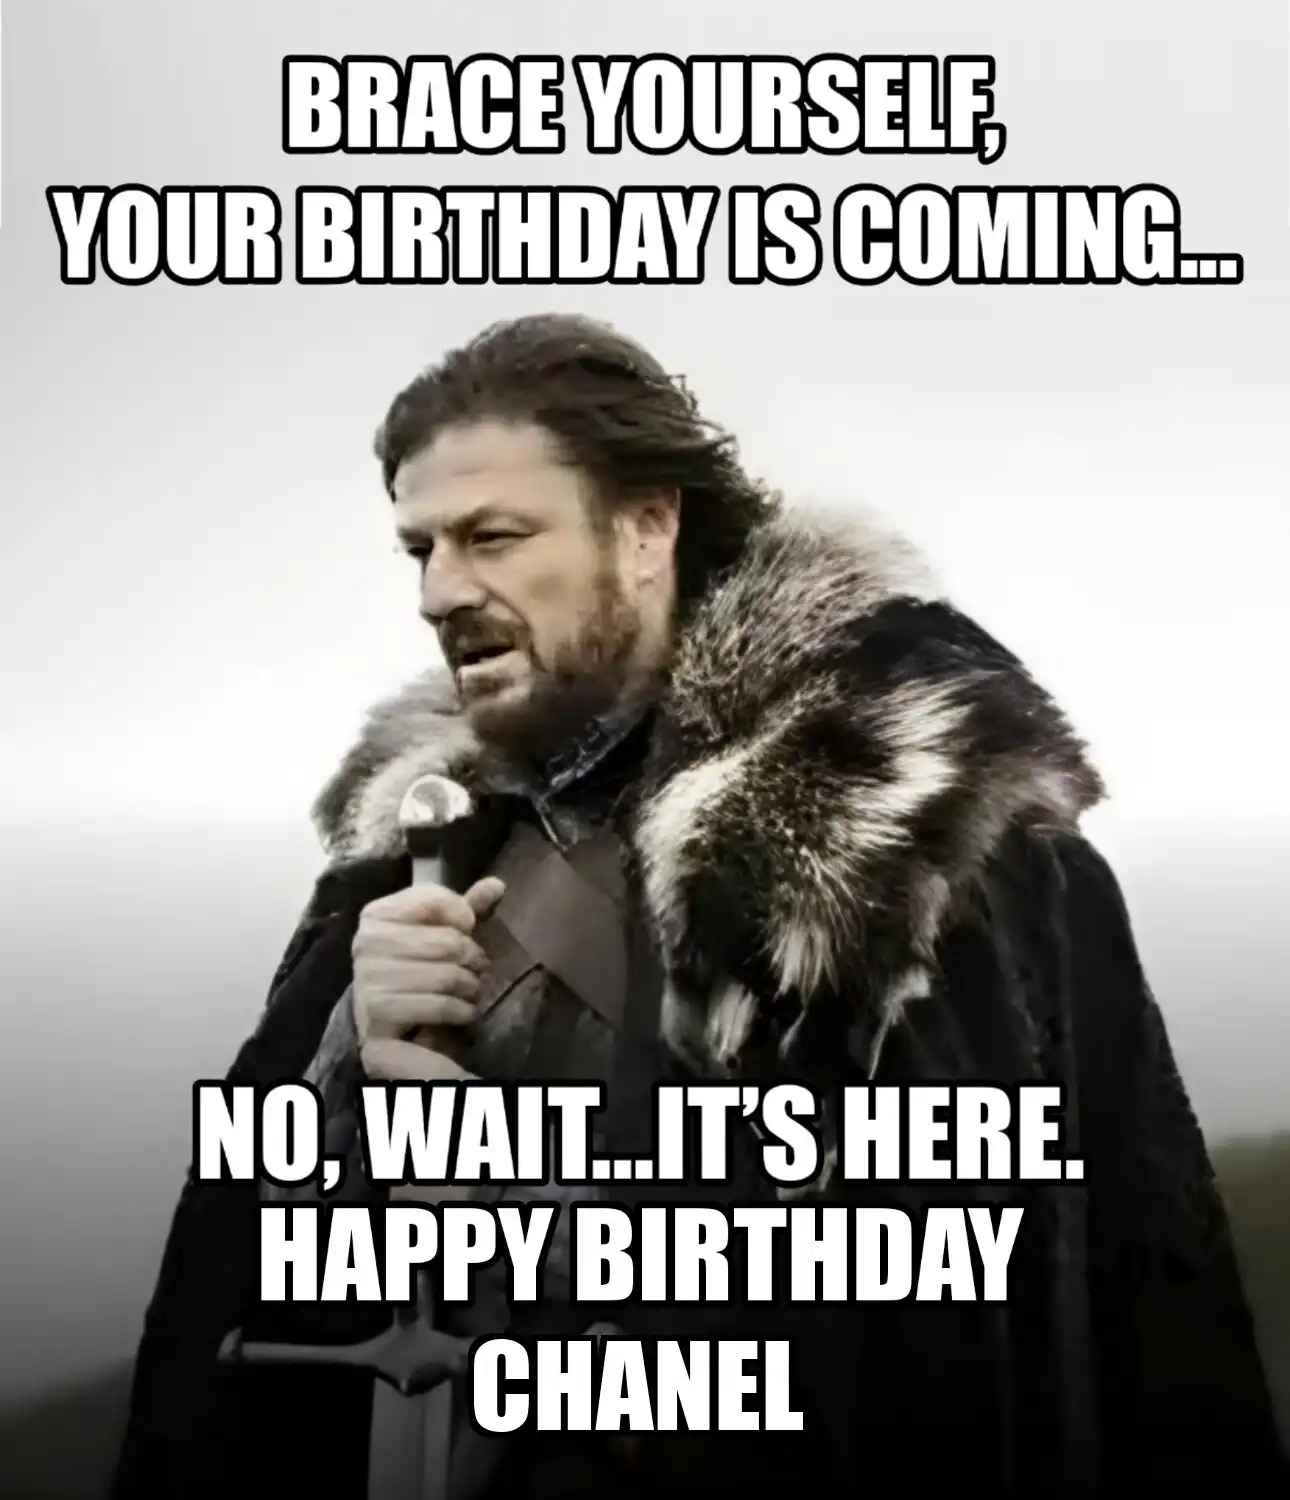 Happy Birthday Chanel Brace Yourself Your Birthday Is Coming Meme